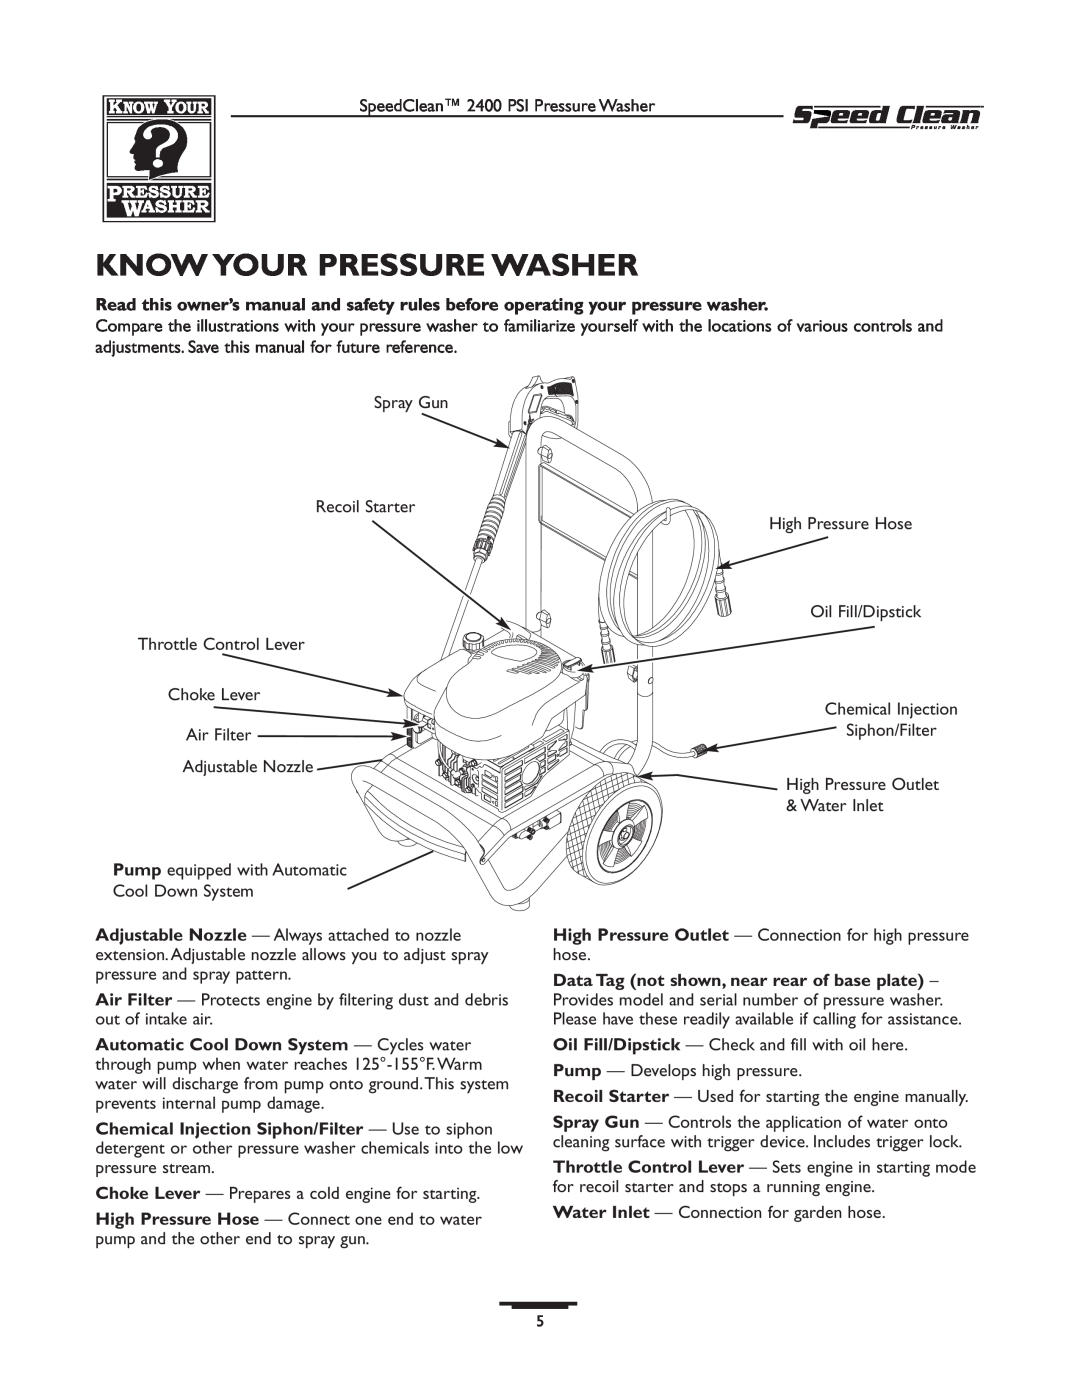 Briggs & Stratton 020227-0 owner manual Know Your Pressure Washer, Siphon/Filter 